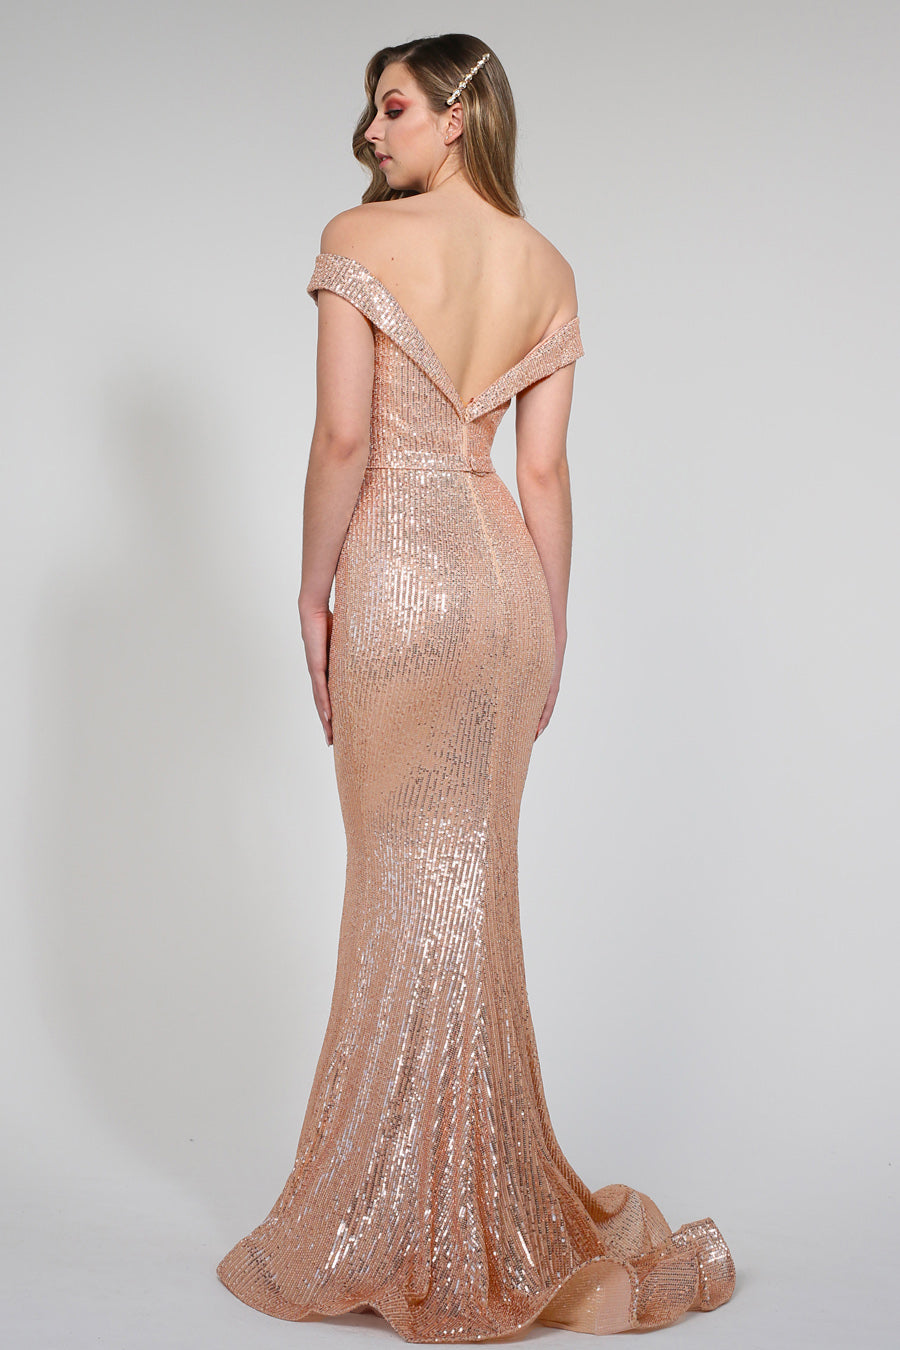 Tina Holly Couture TA822 Rose Gold Sequin Mermaid Formal Dress {vendor} AfterPay Humm ZipPay LayBuy Sezzle